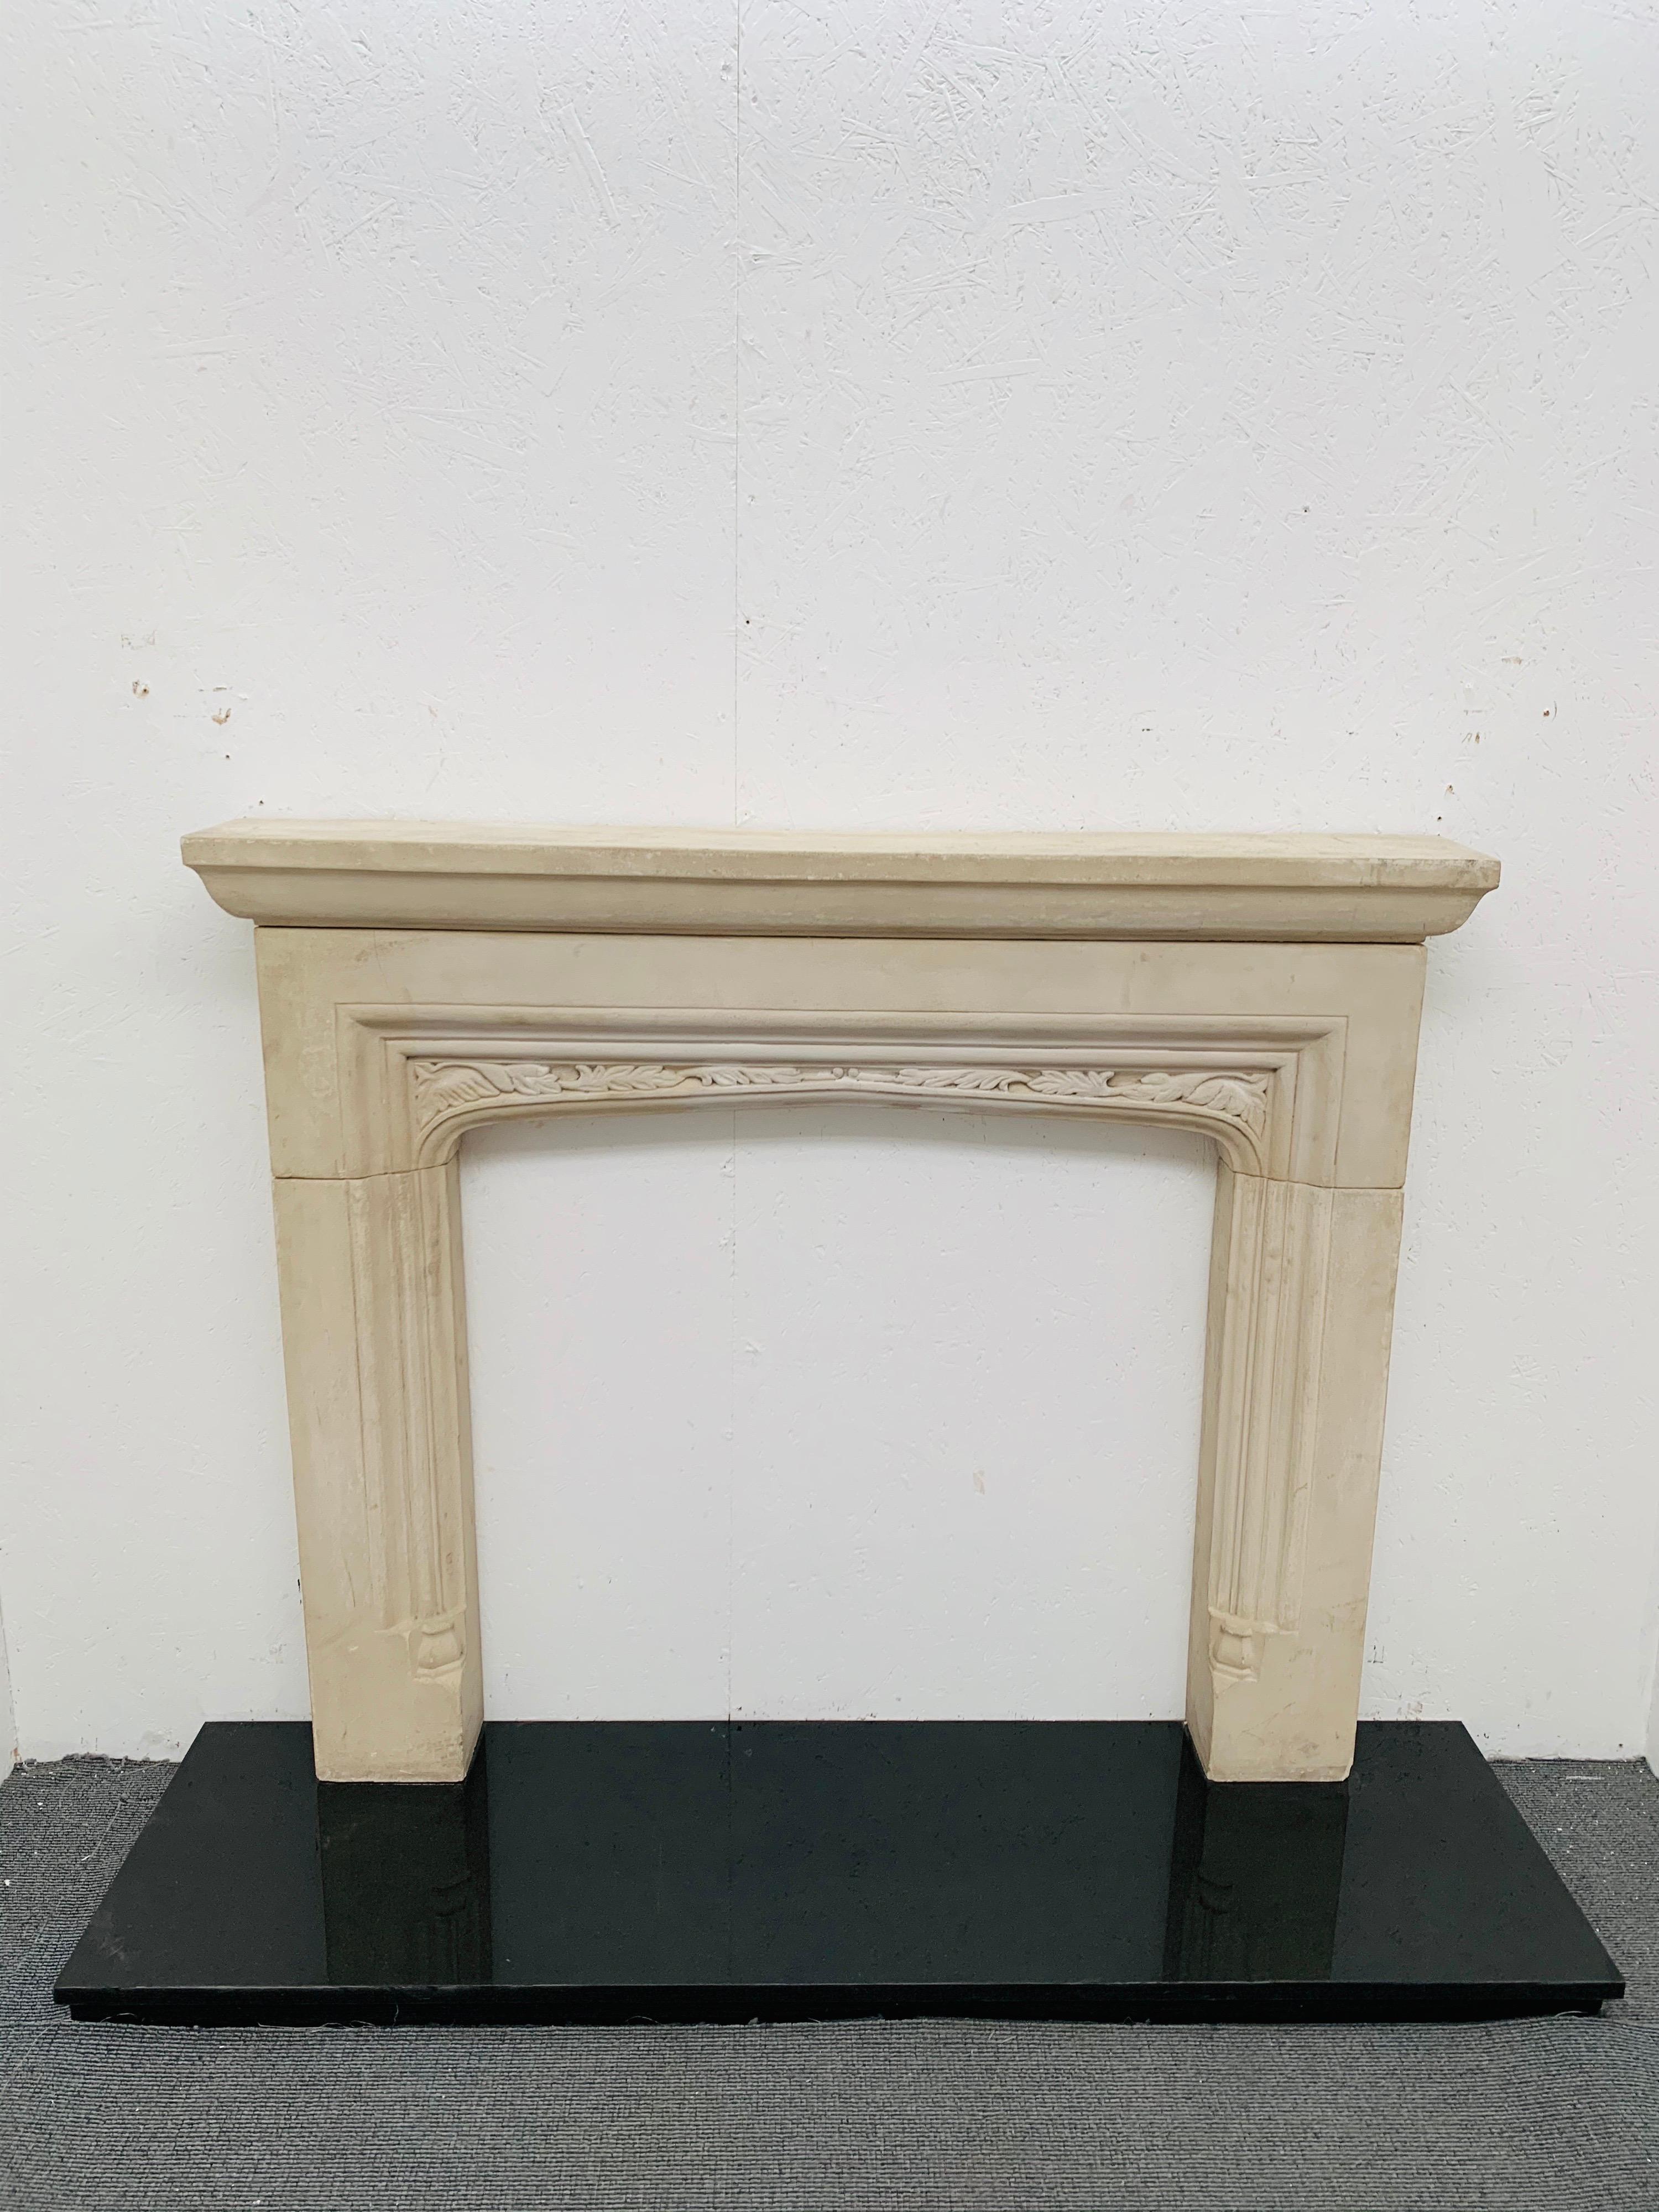 A Tudor style French hand carved limestone fireplace mantelpiece.
A gothic influence with typical foliage around the frieze.
This is made from solid French limestone in 4 pieces, 2 jambs, 1 frieze and 1 shelf.
Good condition with couple of faint